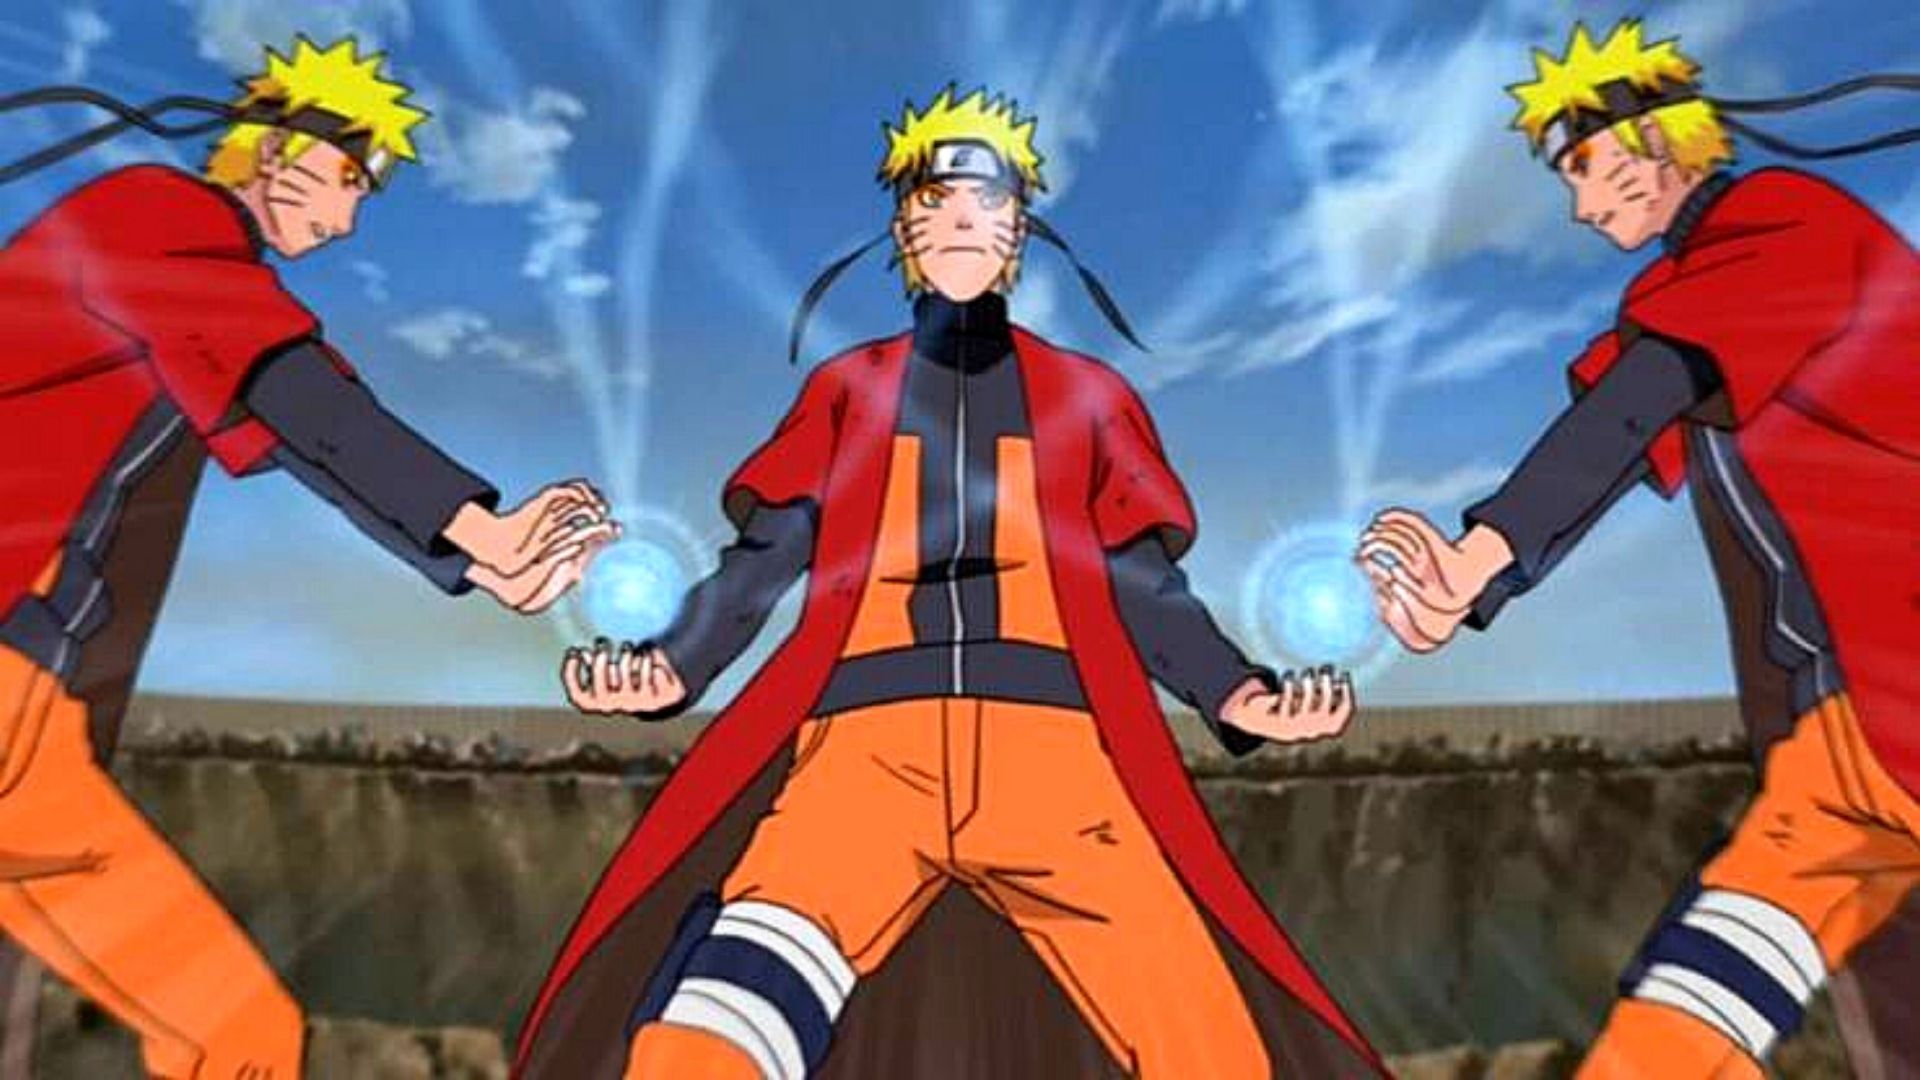 Why Is the Shadow Clone Jutsu Forbidden in Naruto?